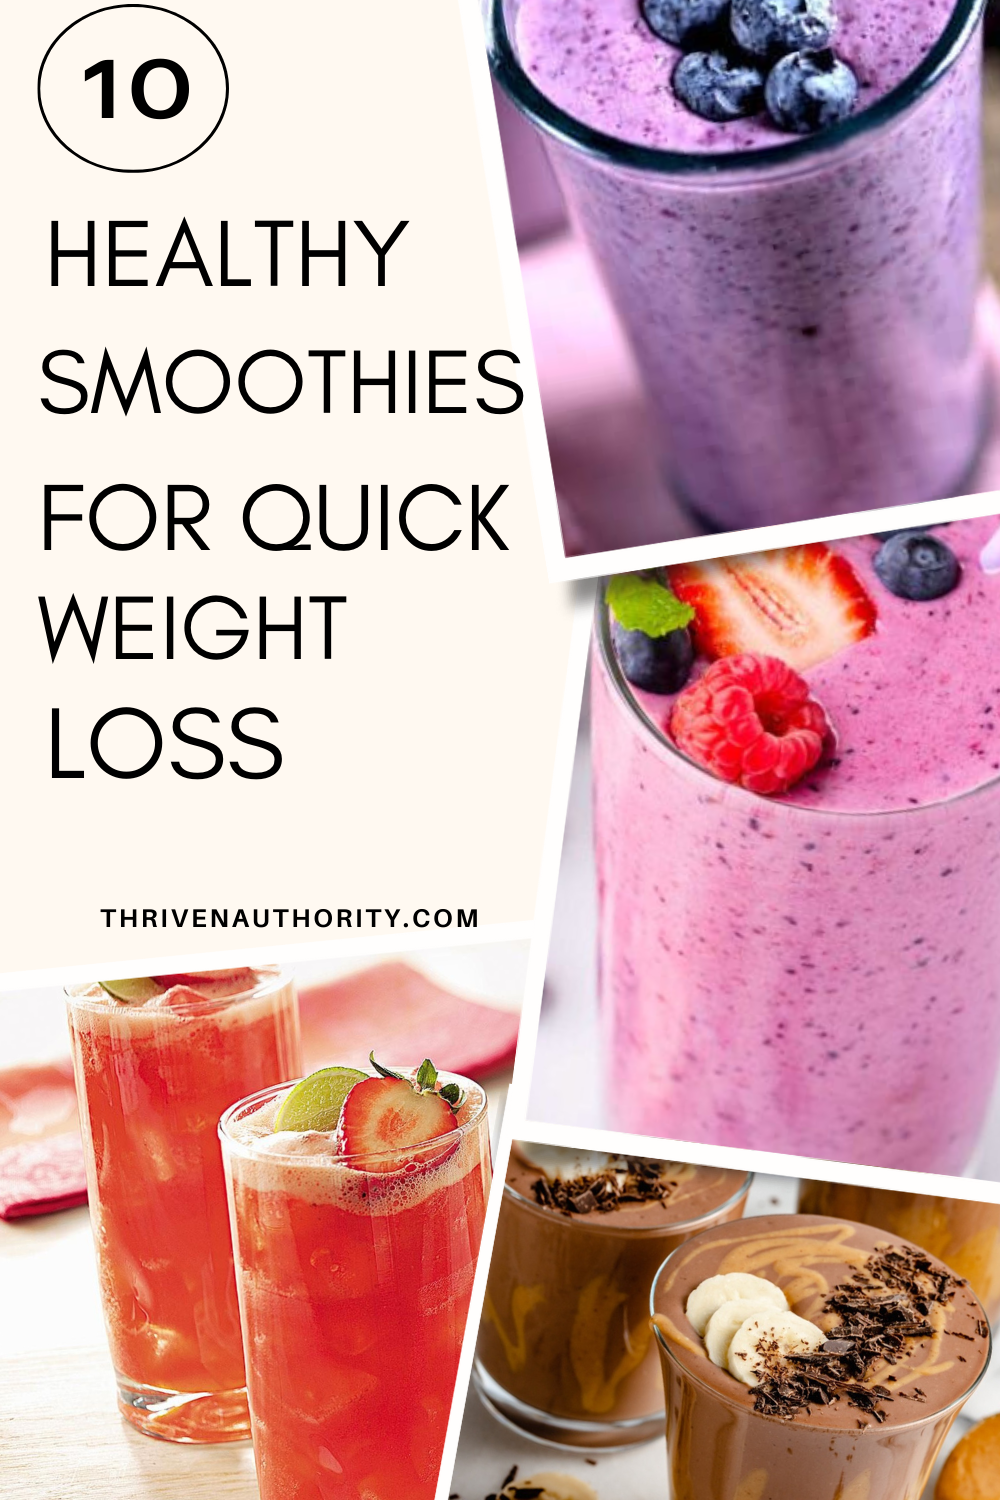 Healthy Smoothies For Quick Weight Loss